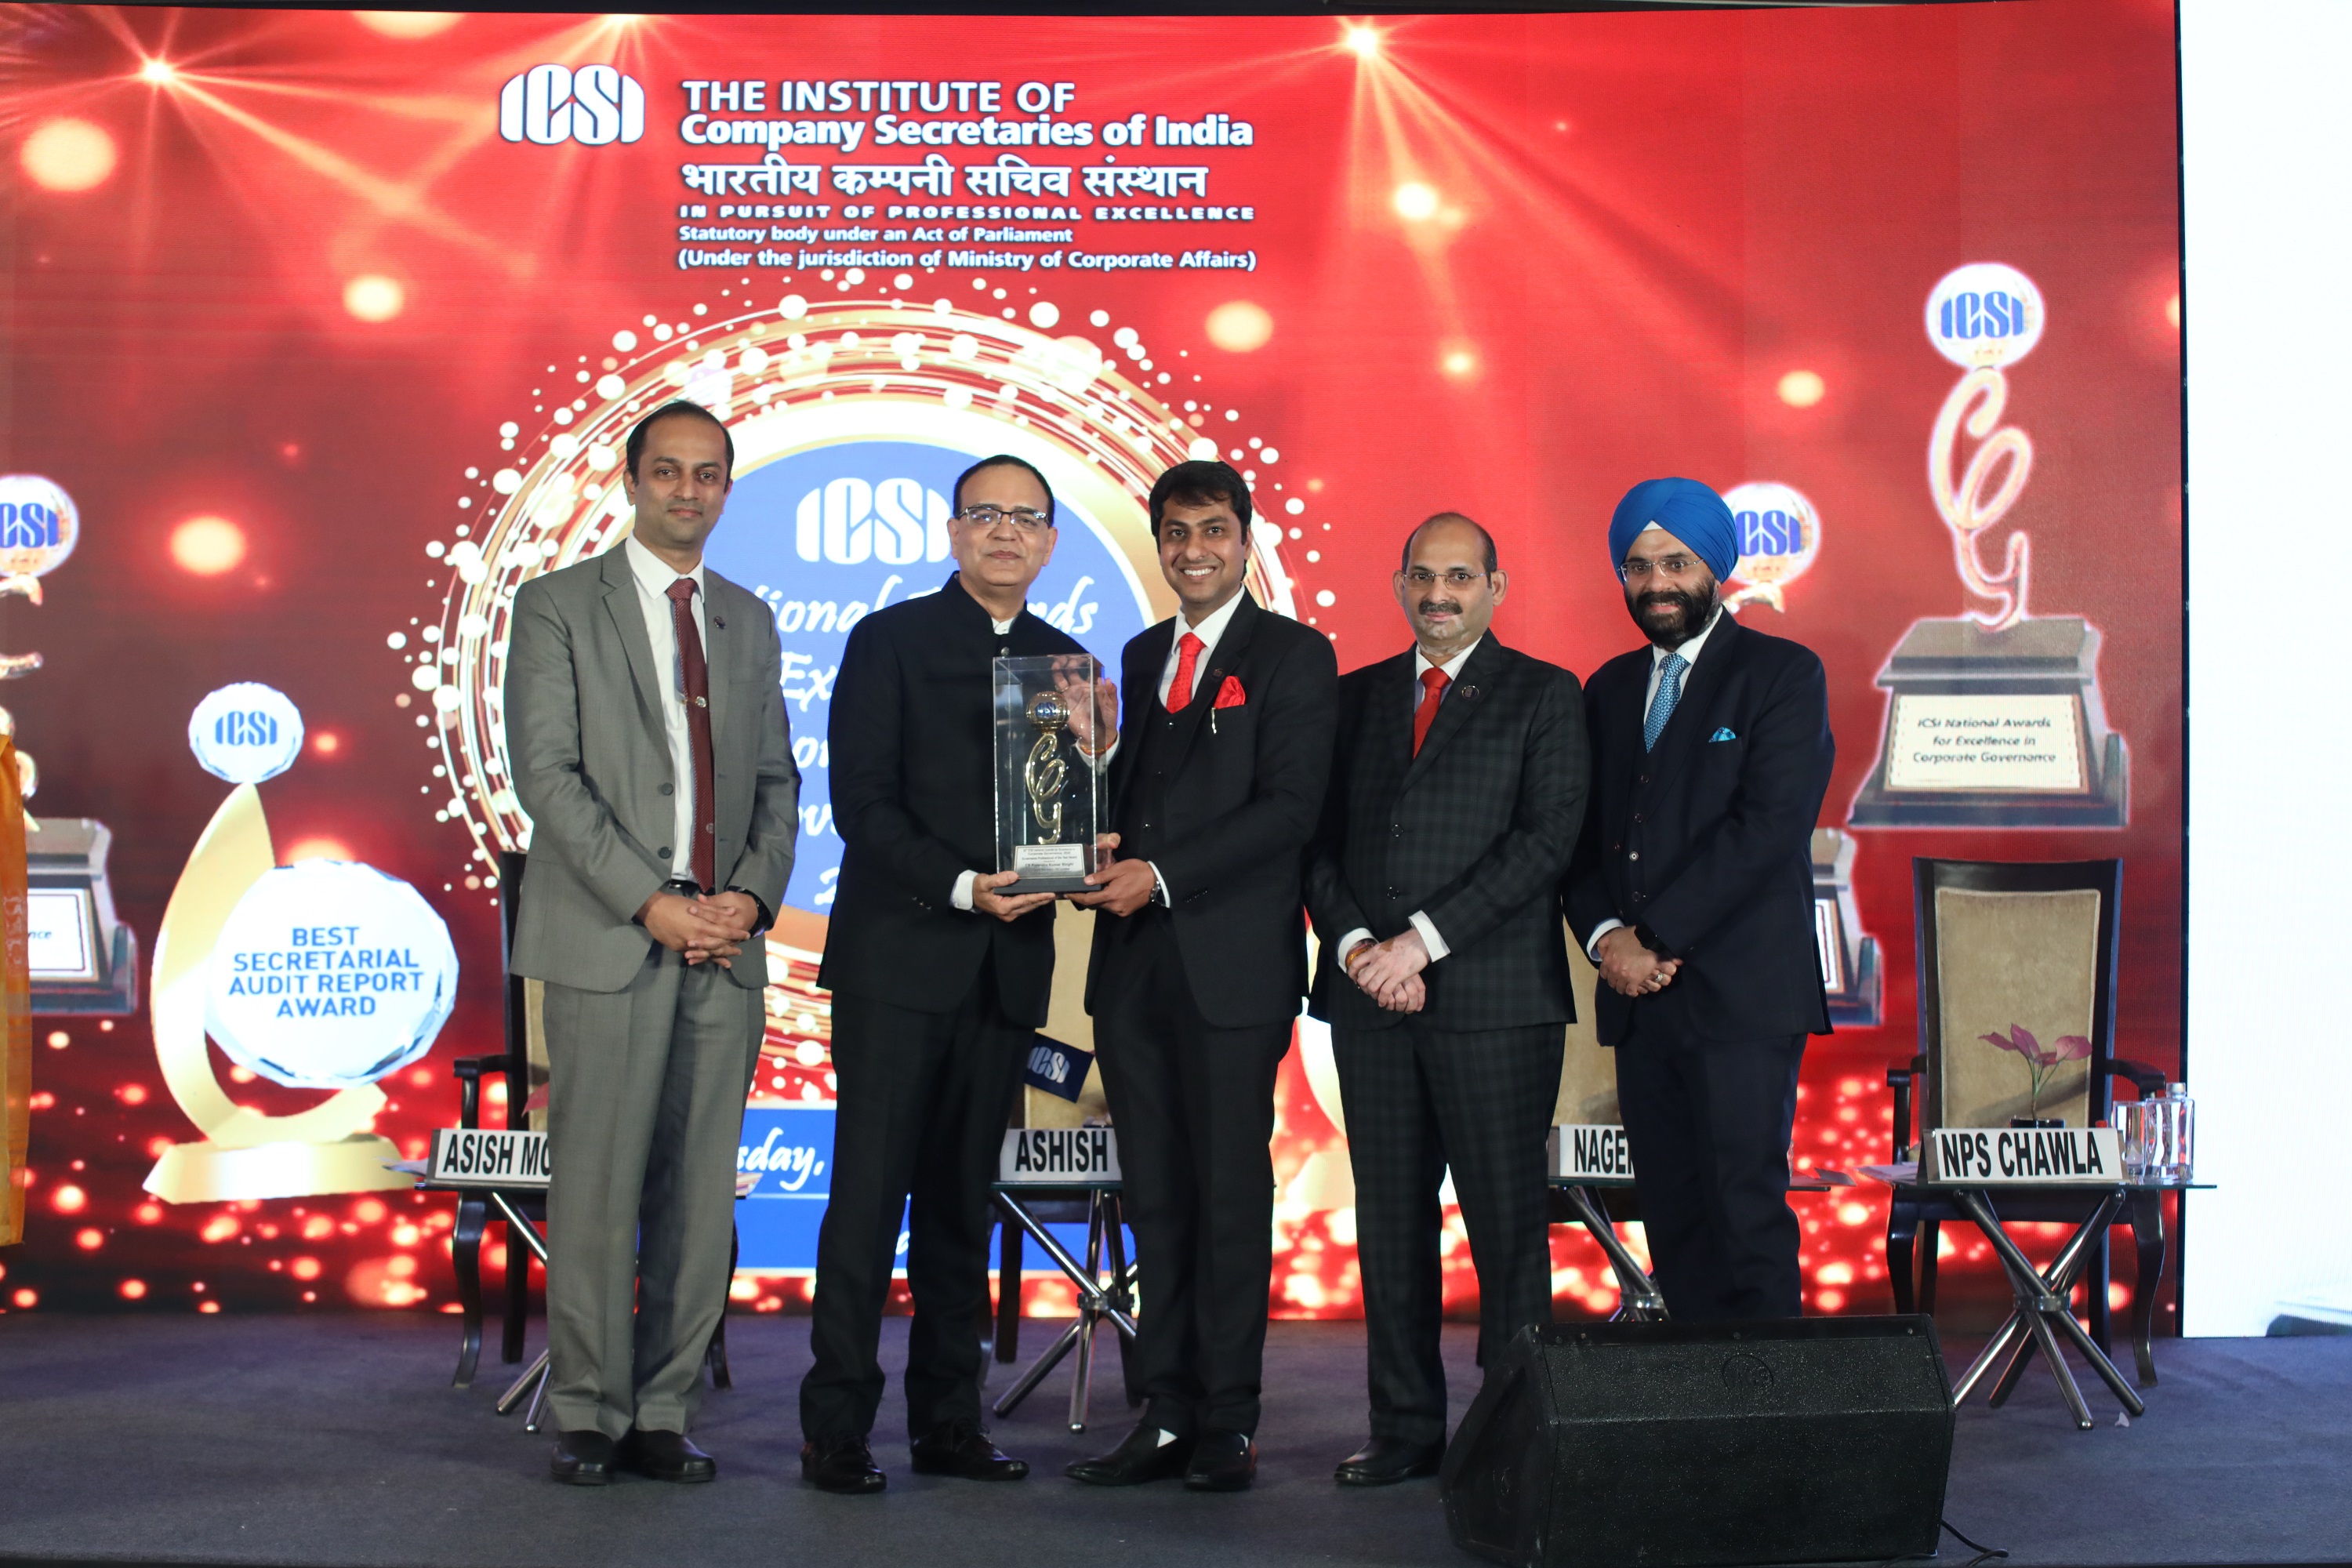 ITC Limited conferred the ICSI National Award for Excellence in Corporate Governance decoding=